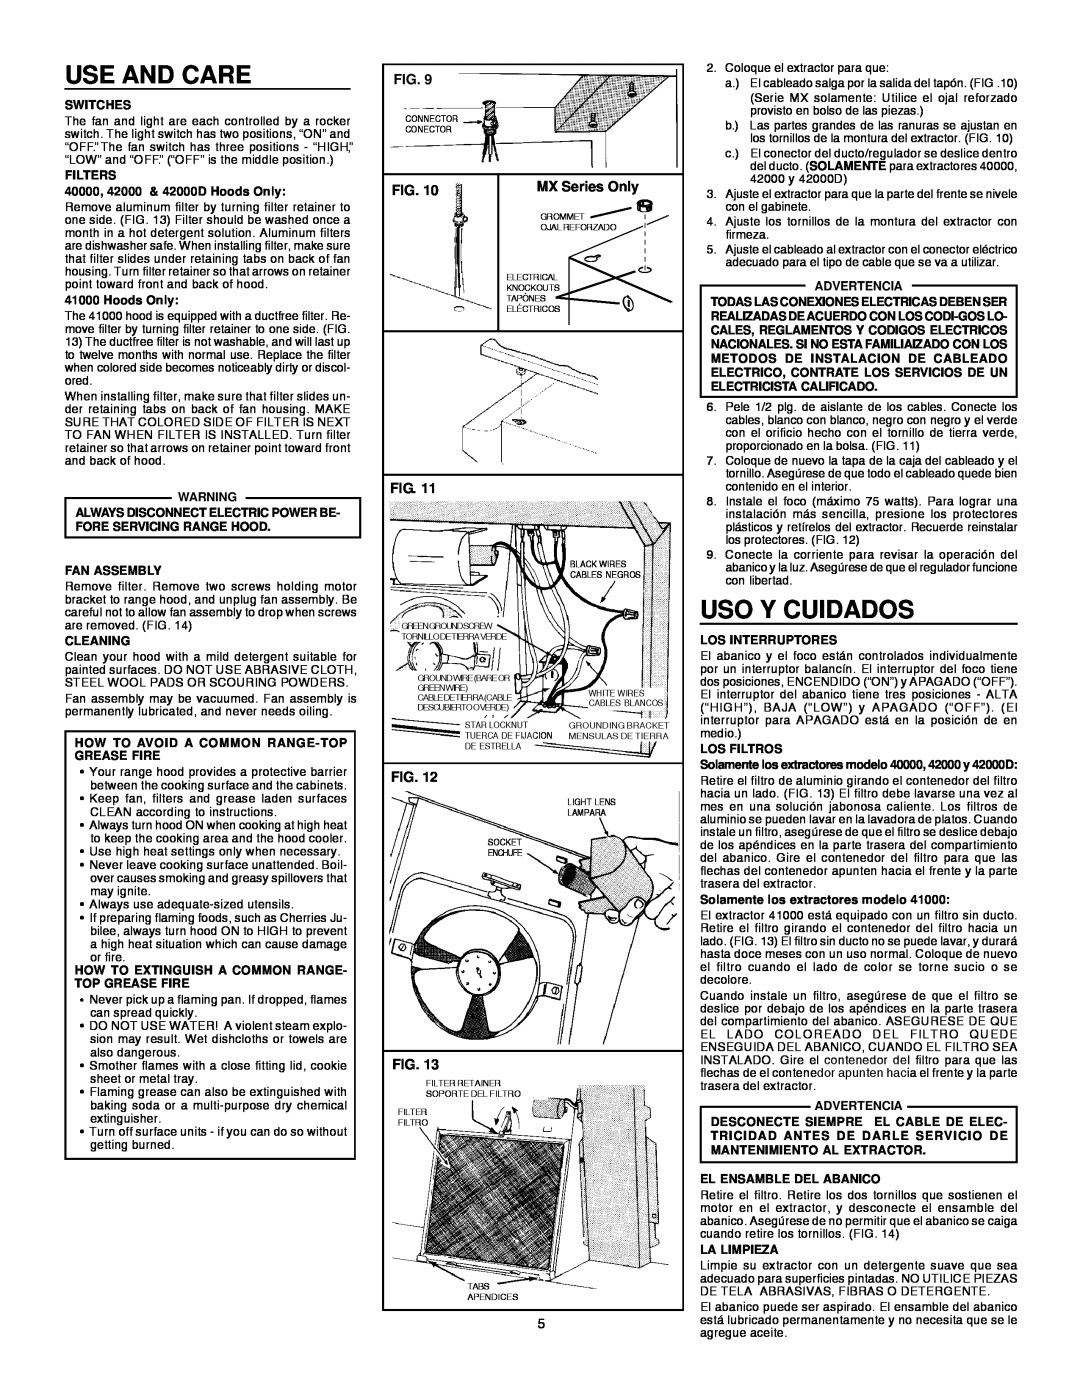 Broan 413004 installation instructions Use And Care, Uso Y Cuidados, MX Series Only 